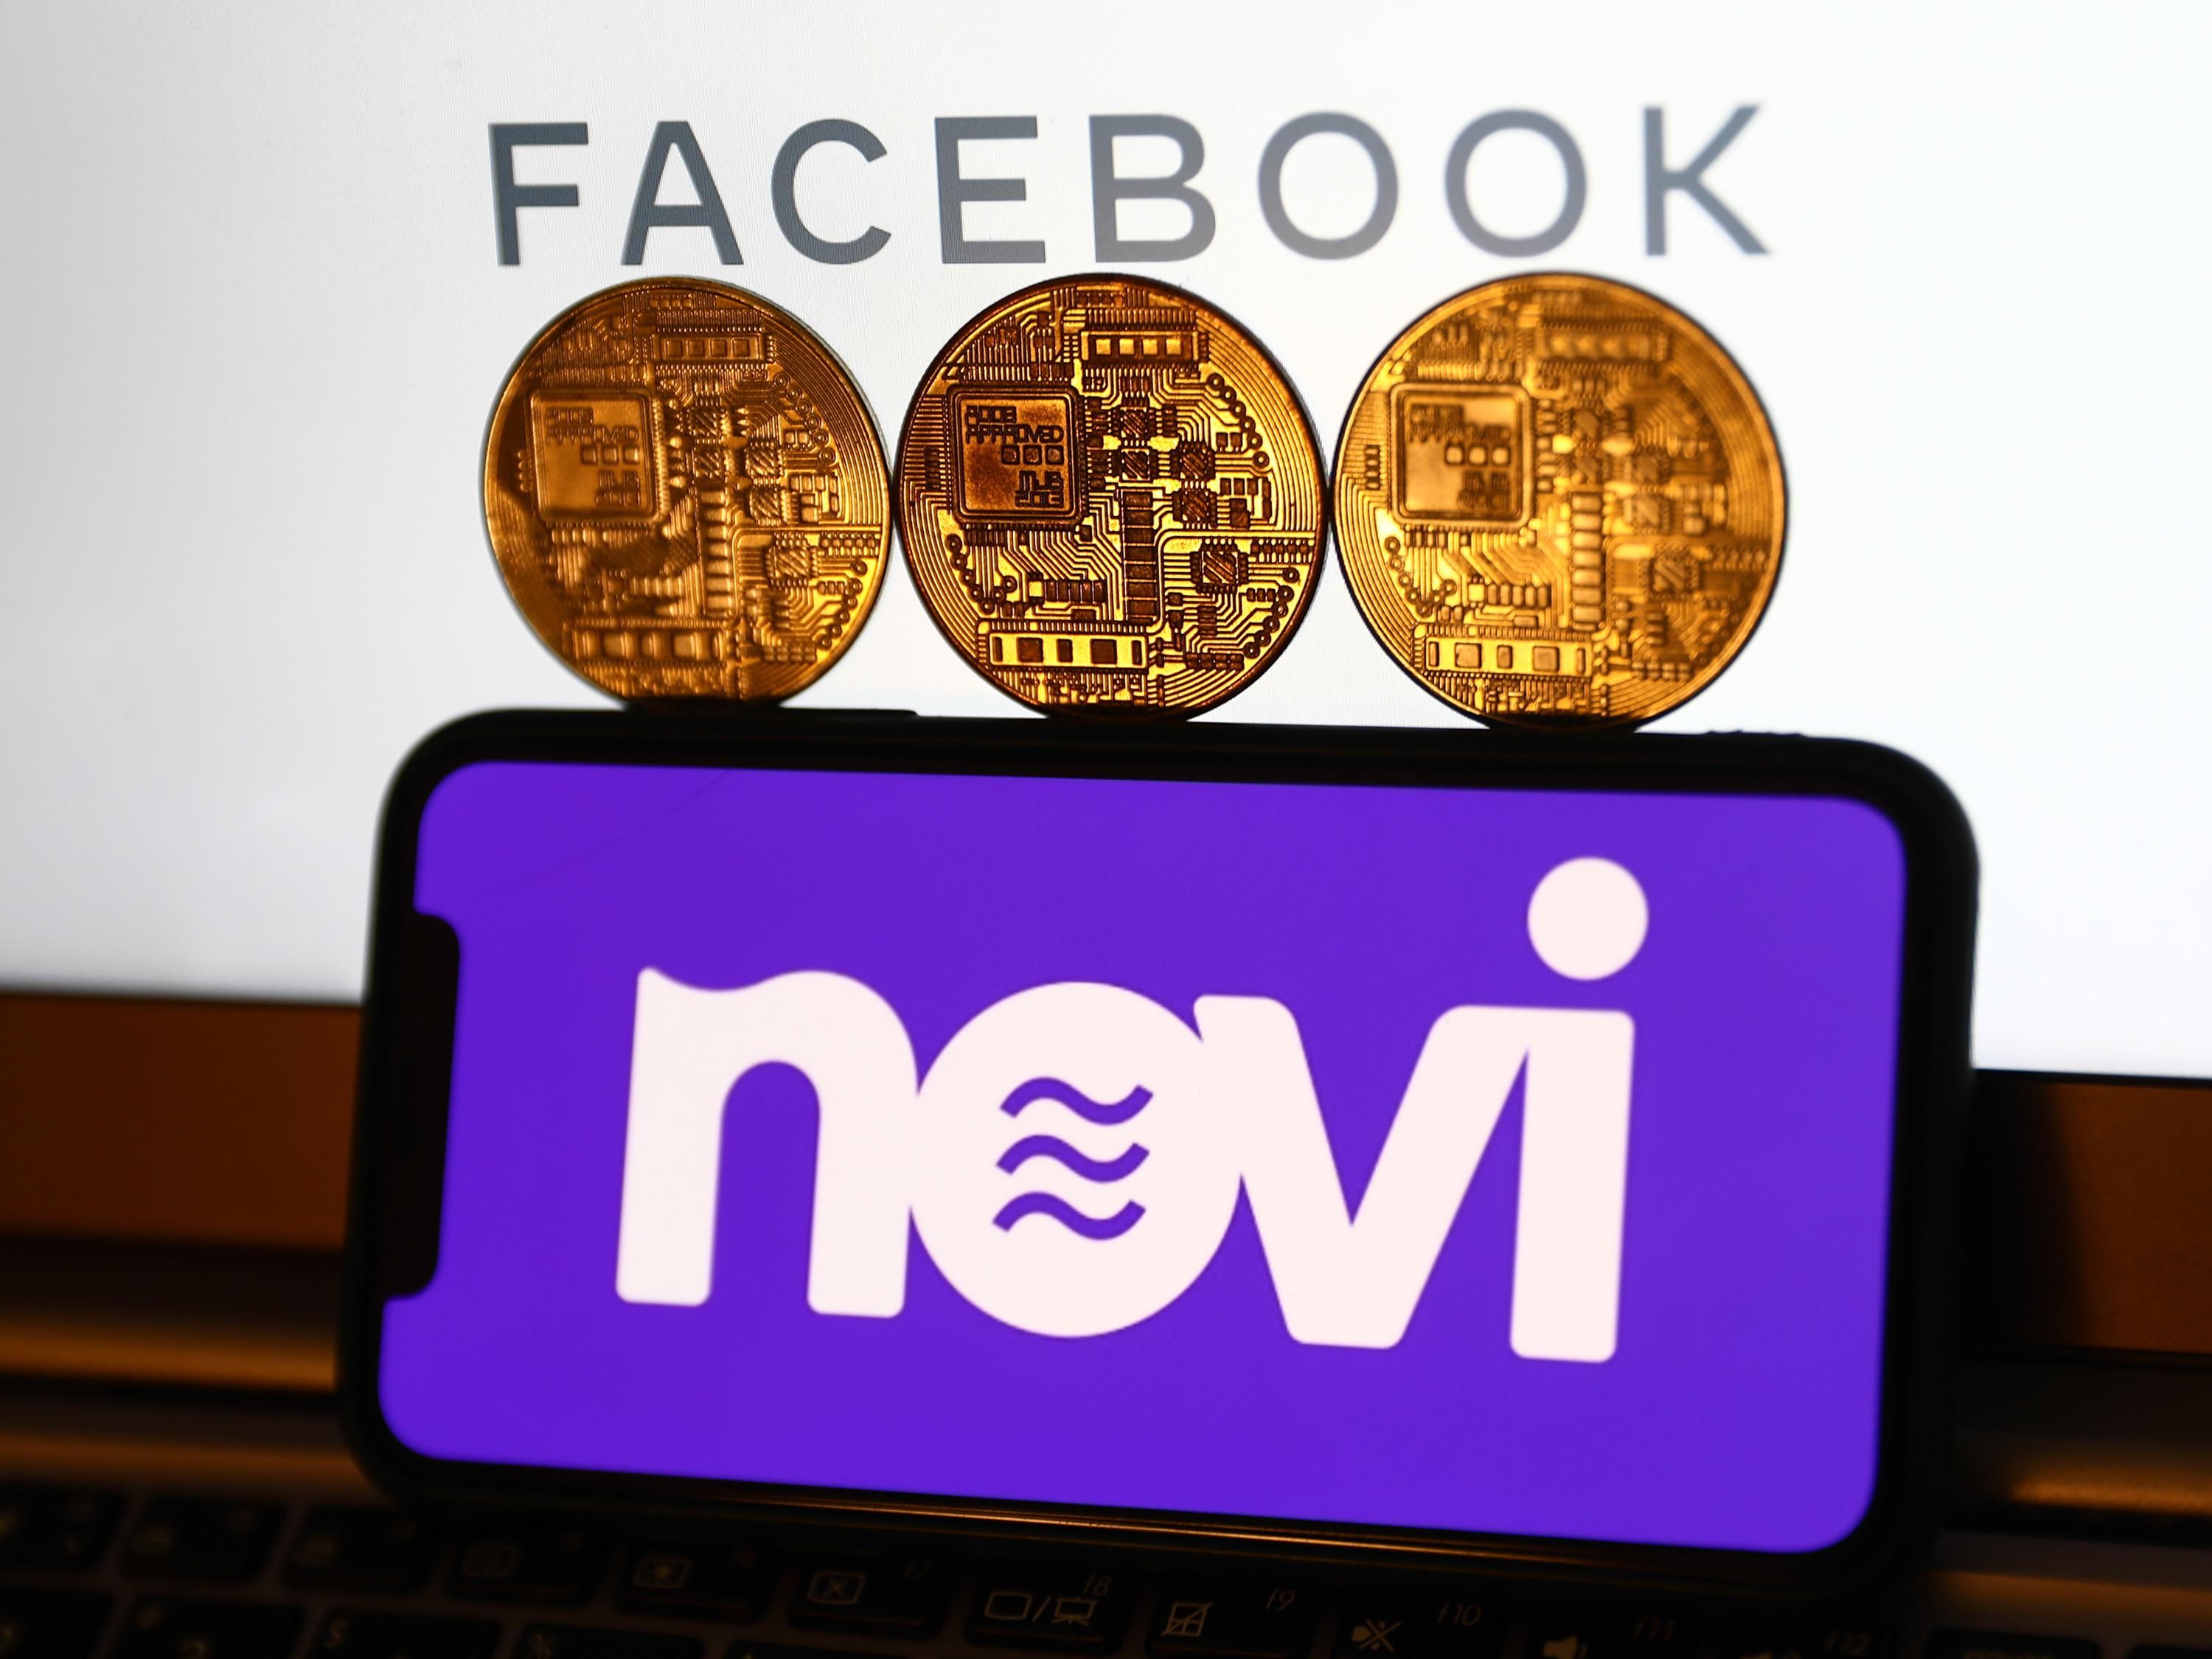 Facebook Coin: How to Invest in Libra, Facebook's New Cryptocurrency